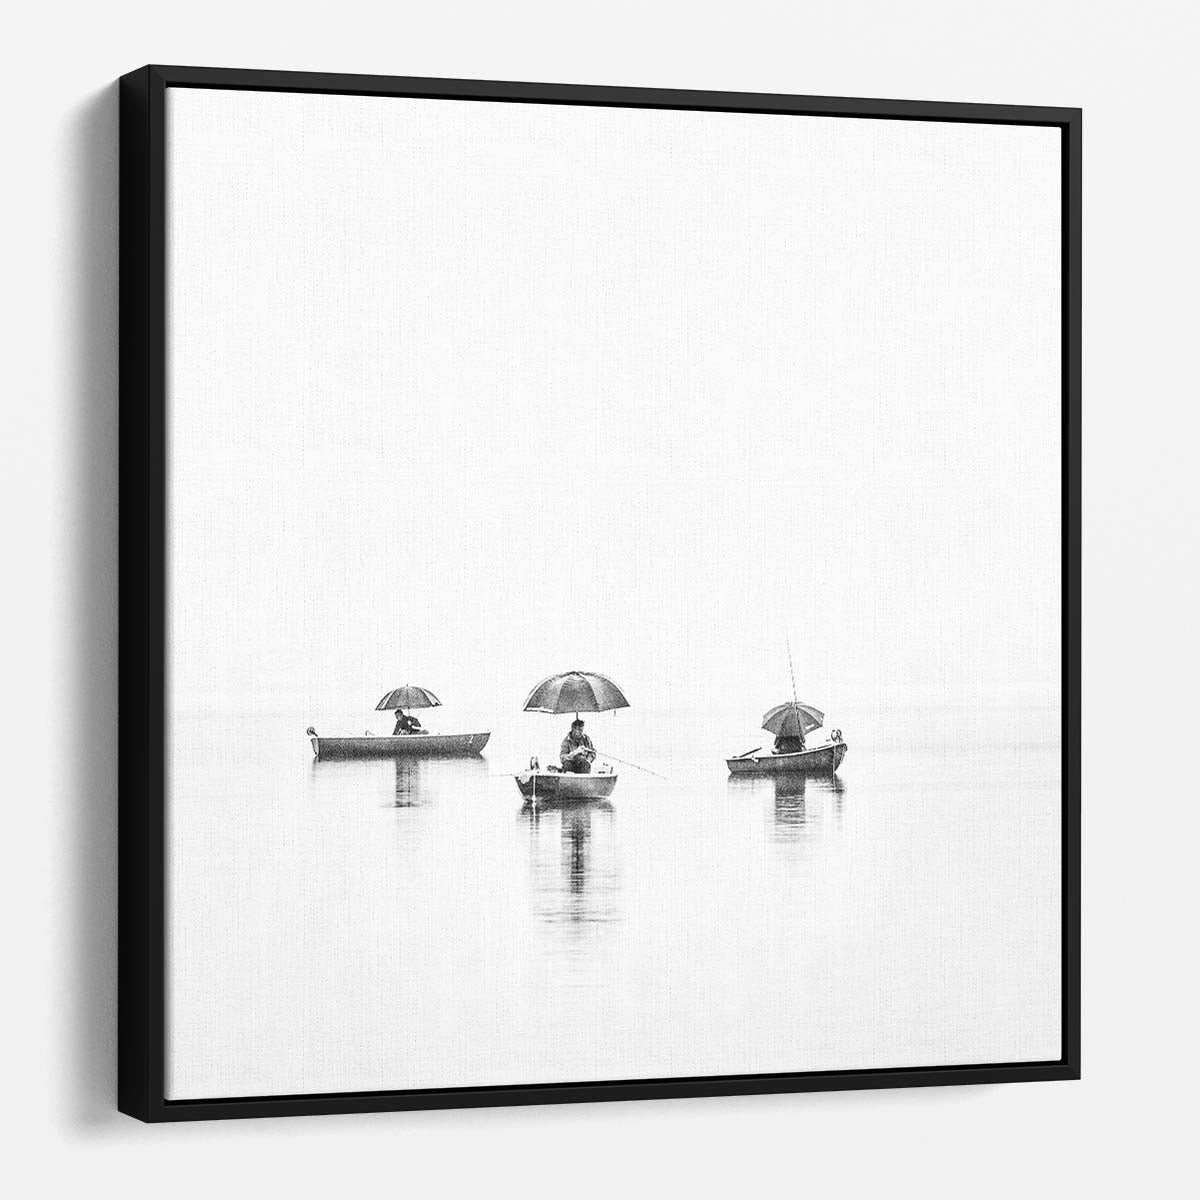 Serene Monochrome Lake Scene with Fishing Reflections & Rowboats Wall Art by Luxuriance Designs. Made in USA.